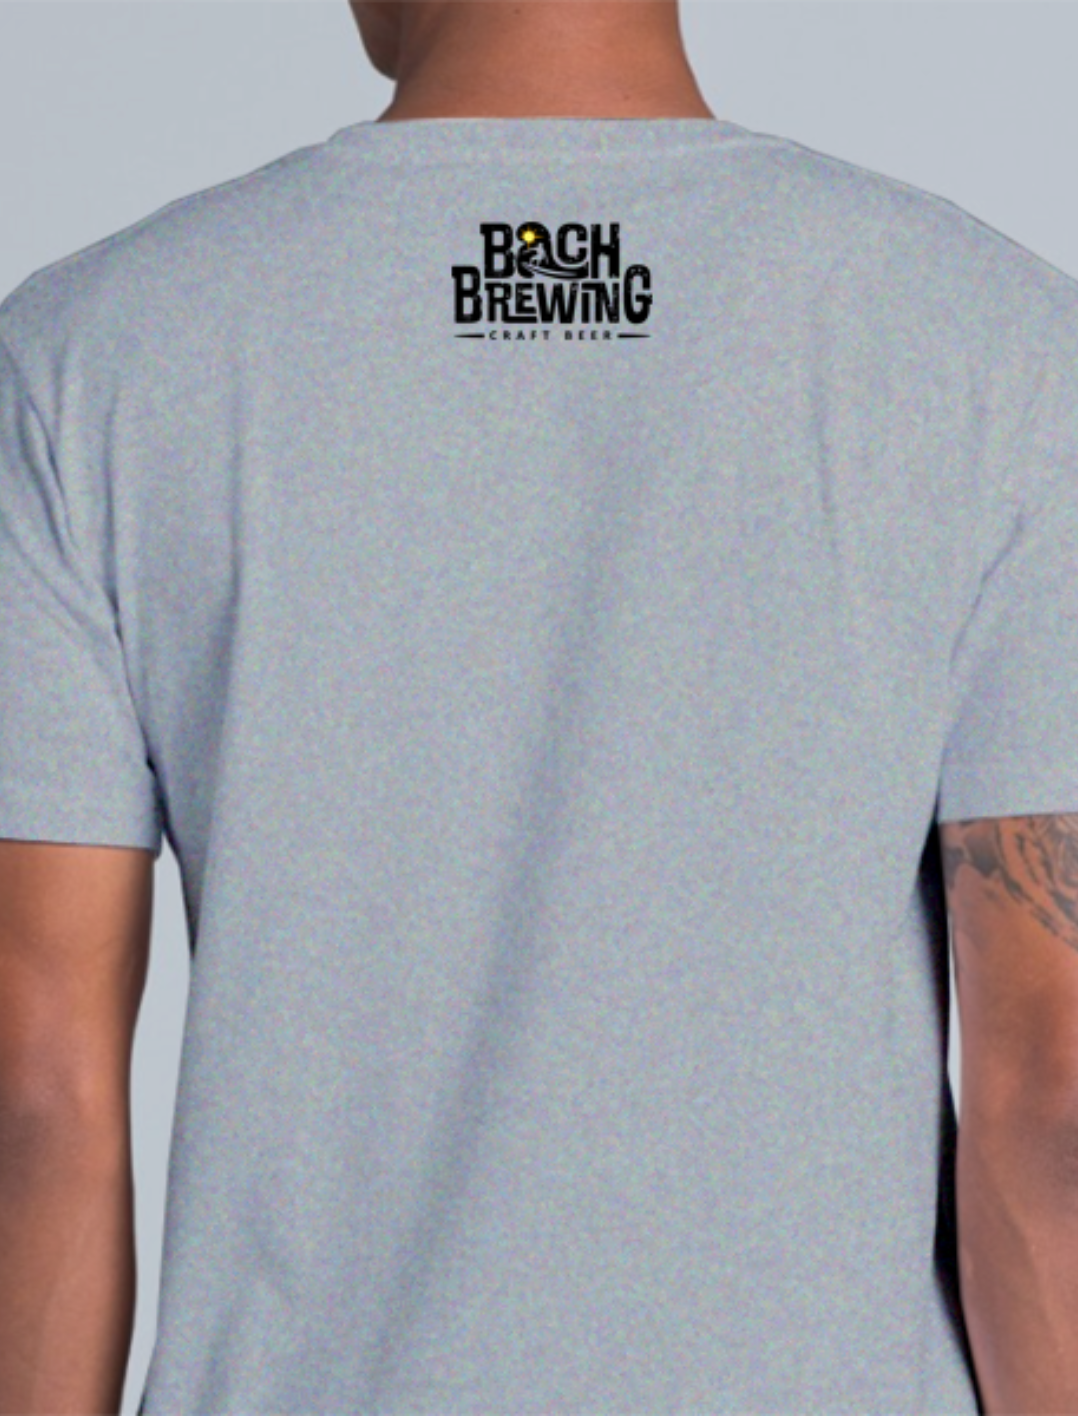 Bach Brewing Mens T-shirt - All Day non alcoholic IPA (front graphic)